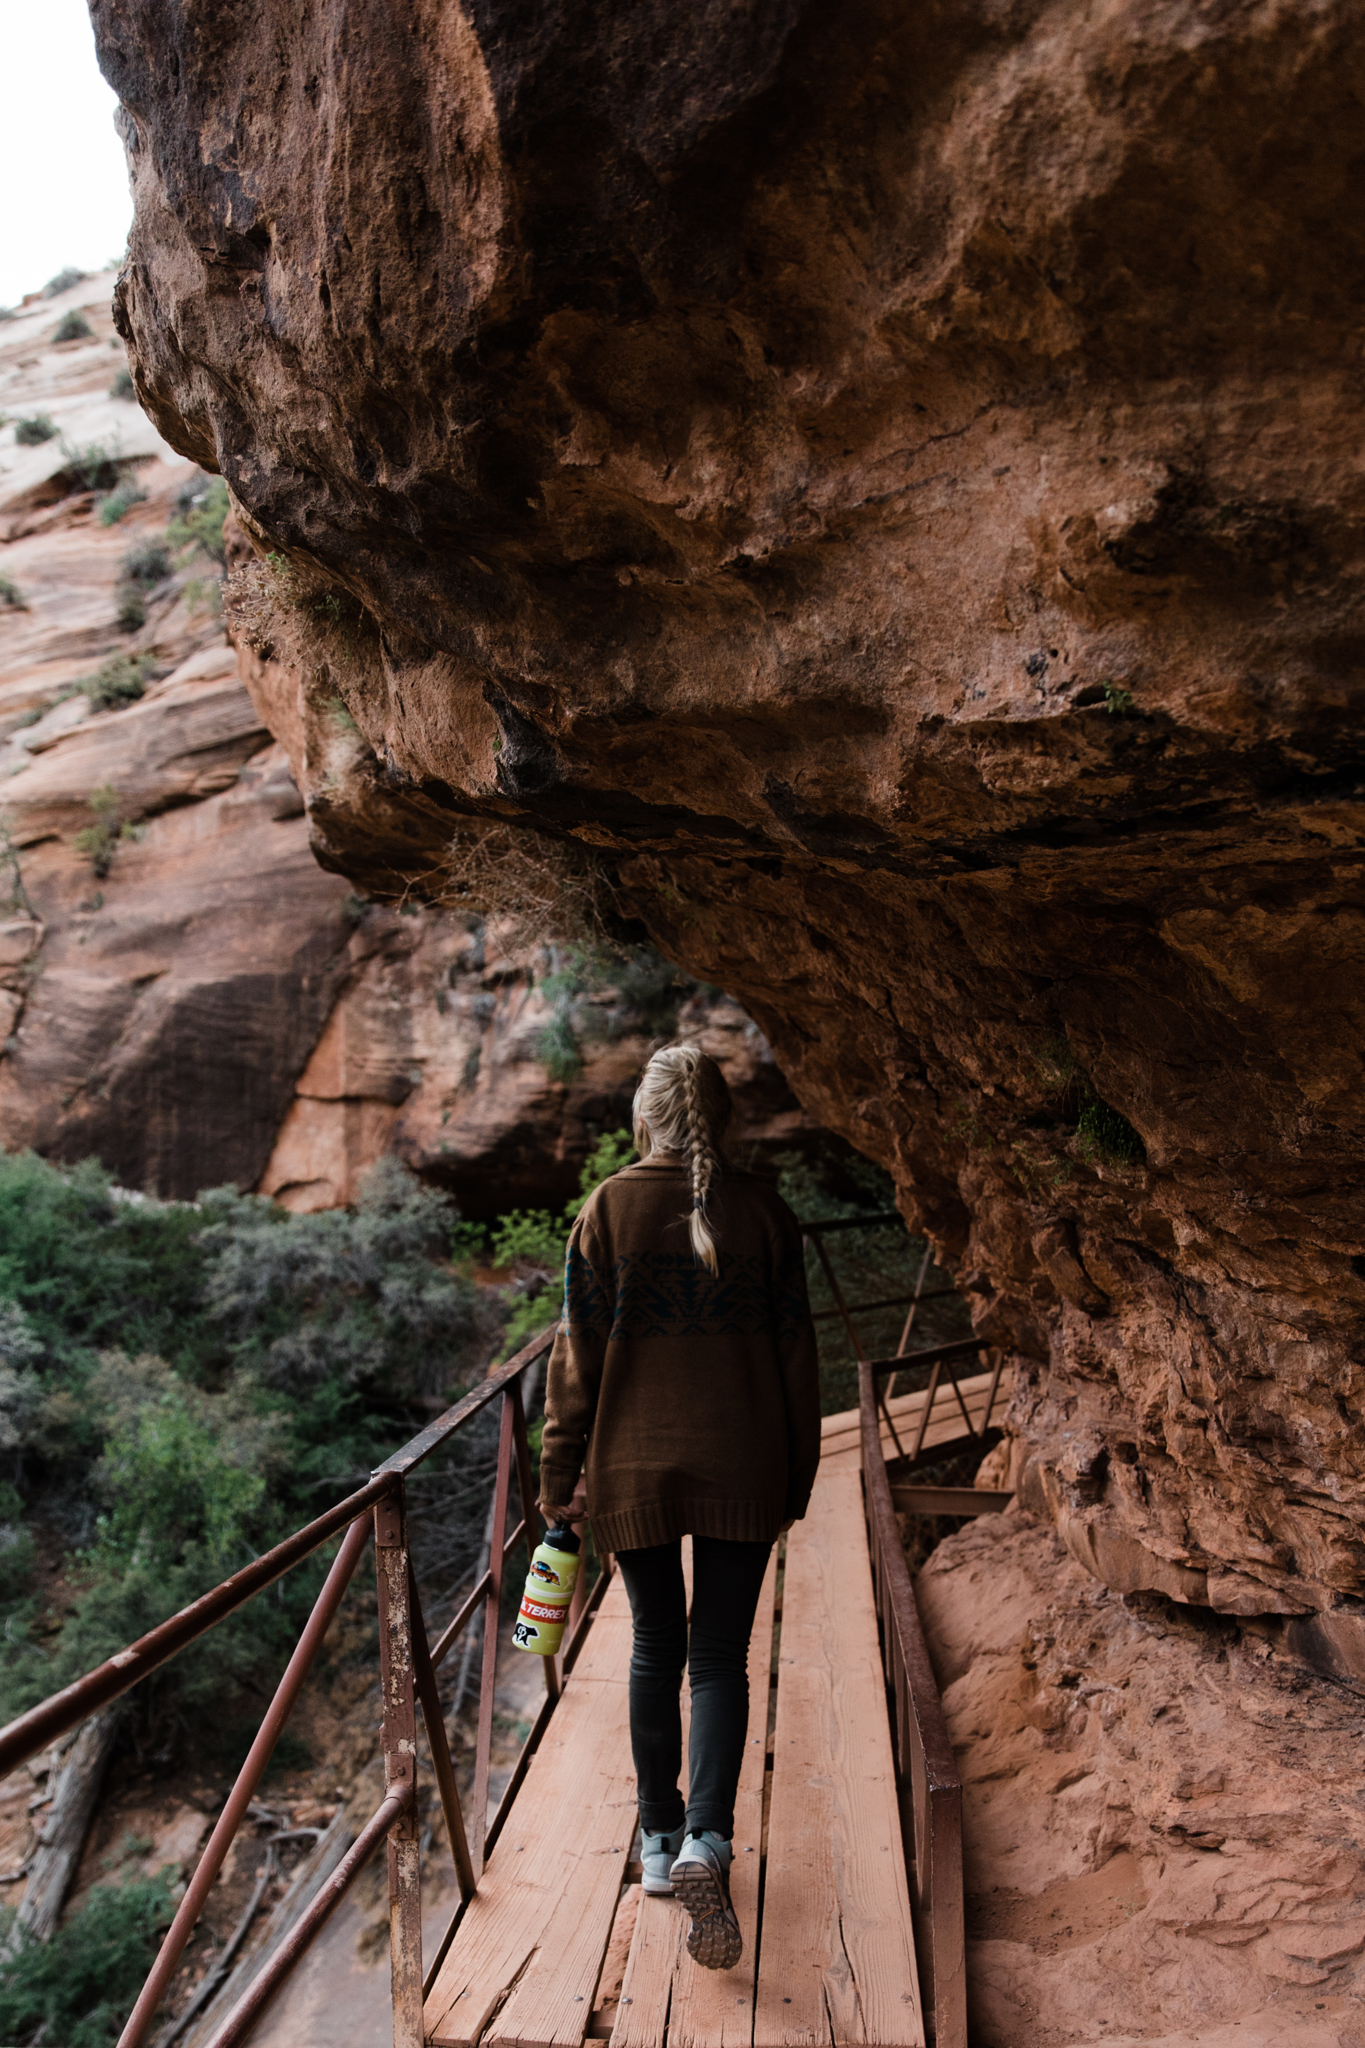 hiking in zion national park | utah and california adventure elopement photographers | the hearnes adventure photography | www.thehearnes.com